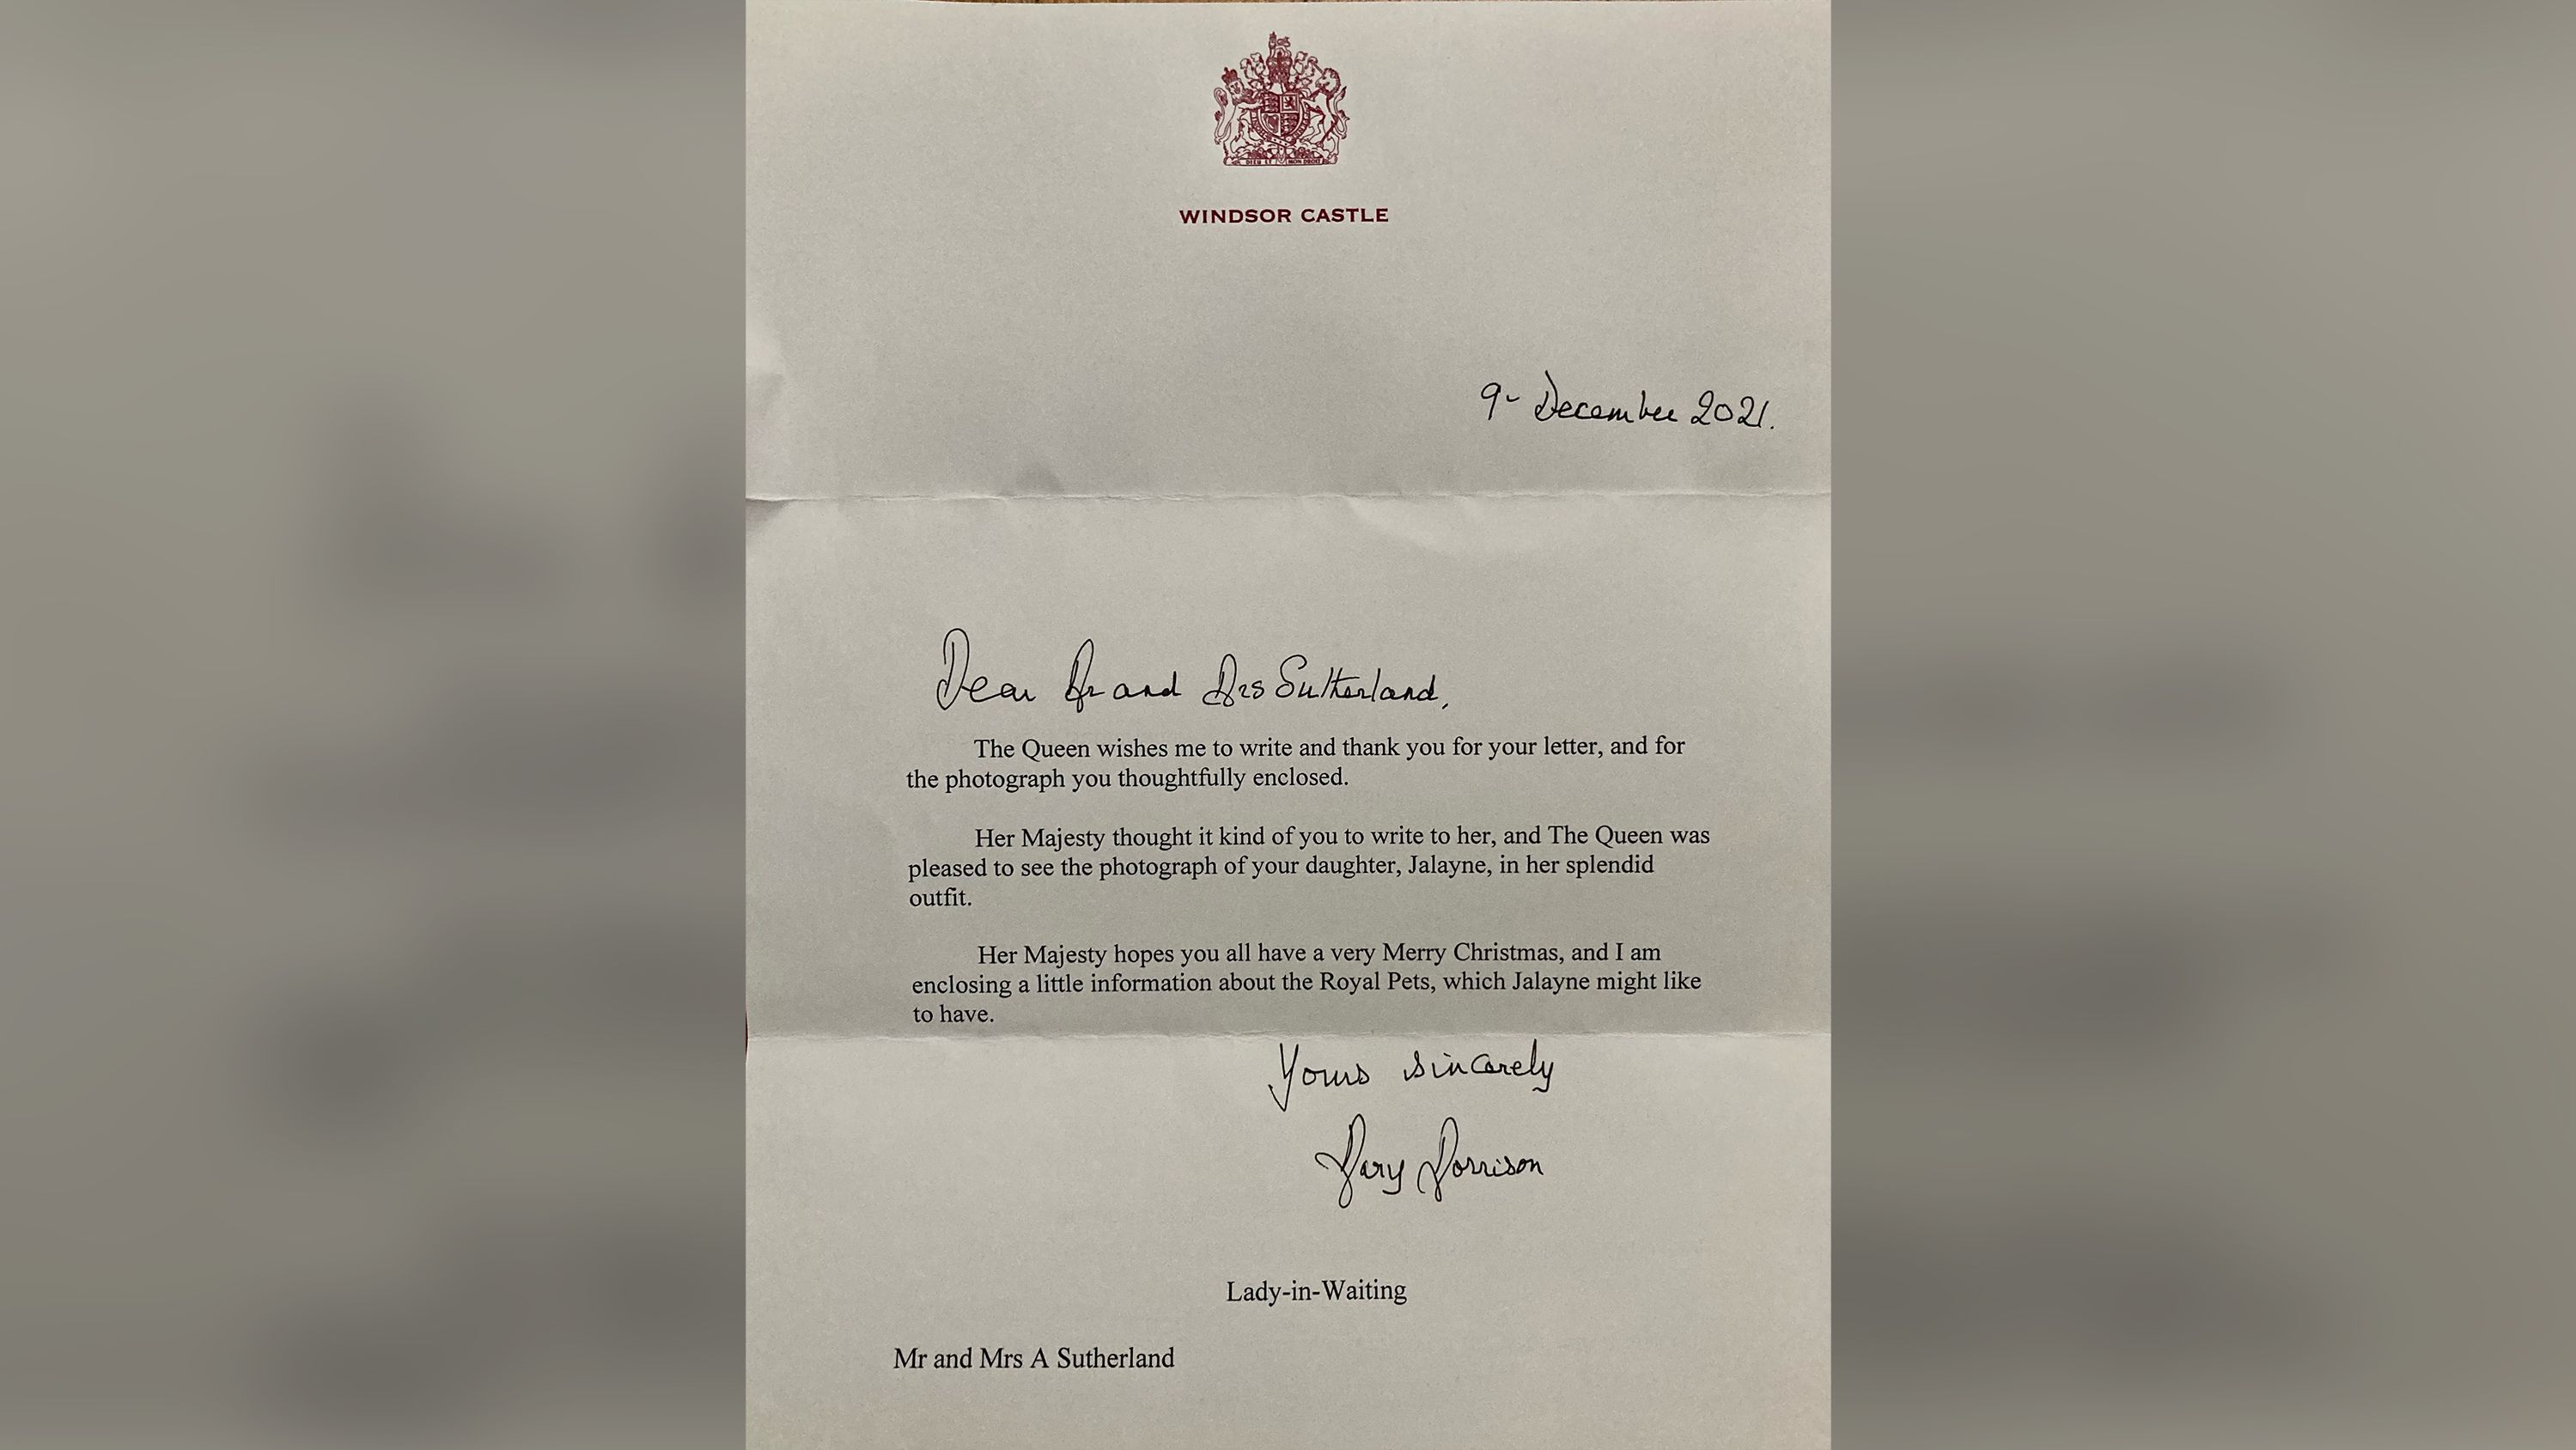 The letter the Sutherland's recieved on December 27 from Windsor Castle.